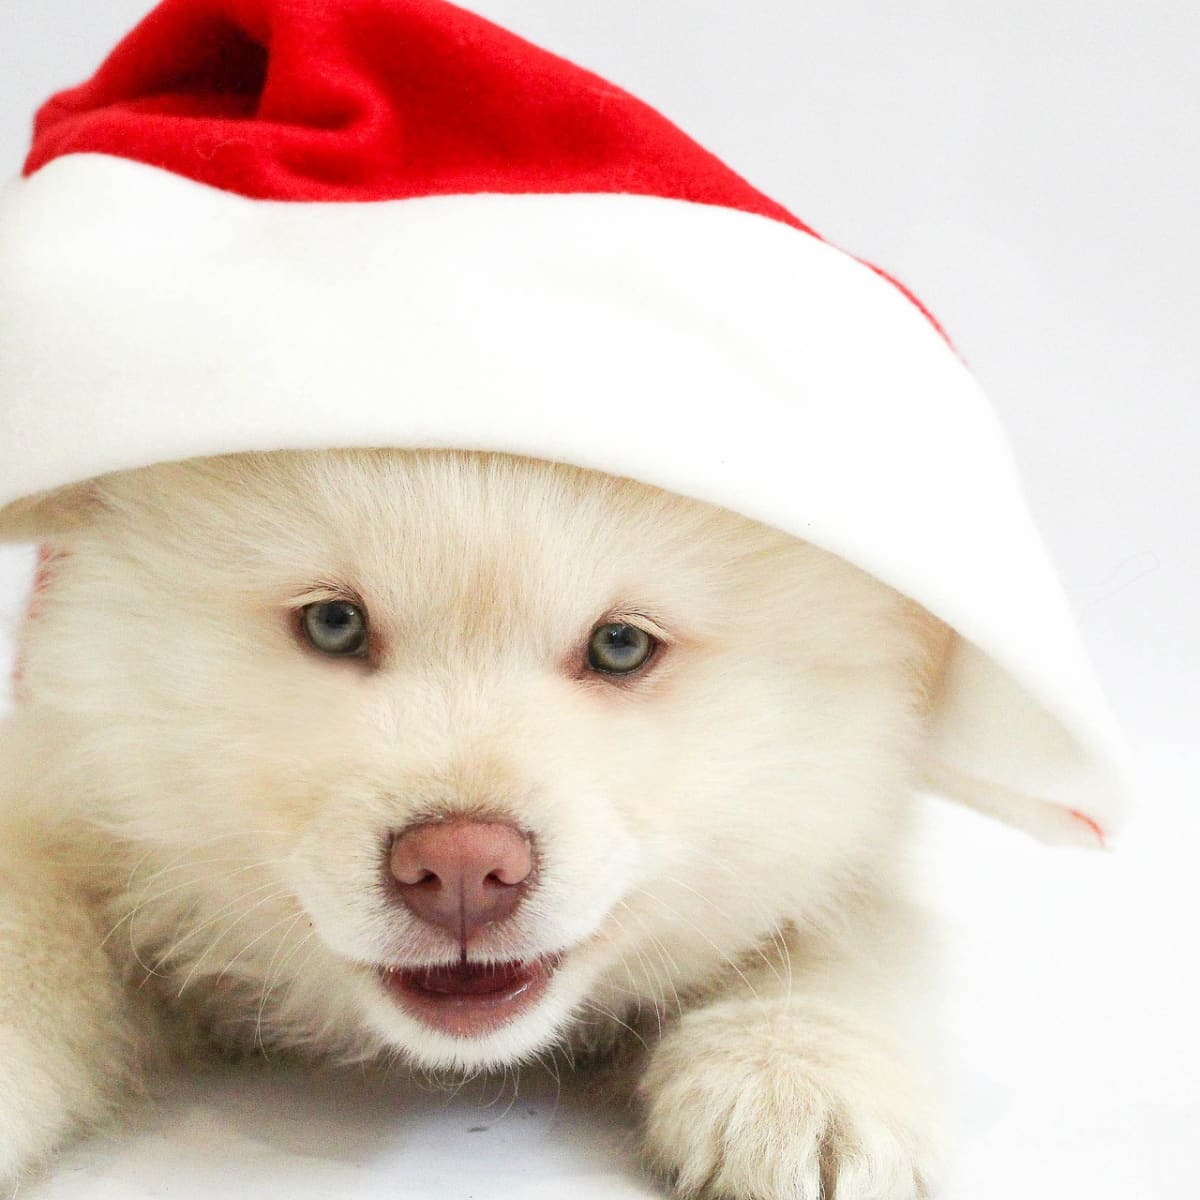 Should You Give a Pet as a Gift? Ask Yourself These 6 Questions First